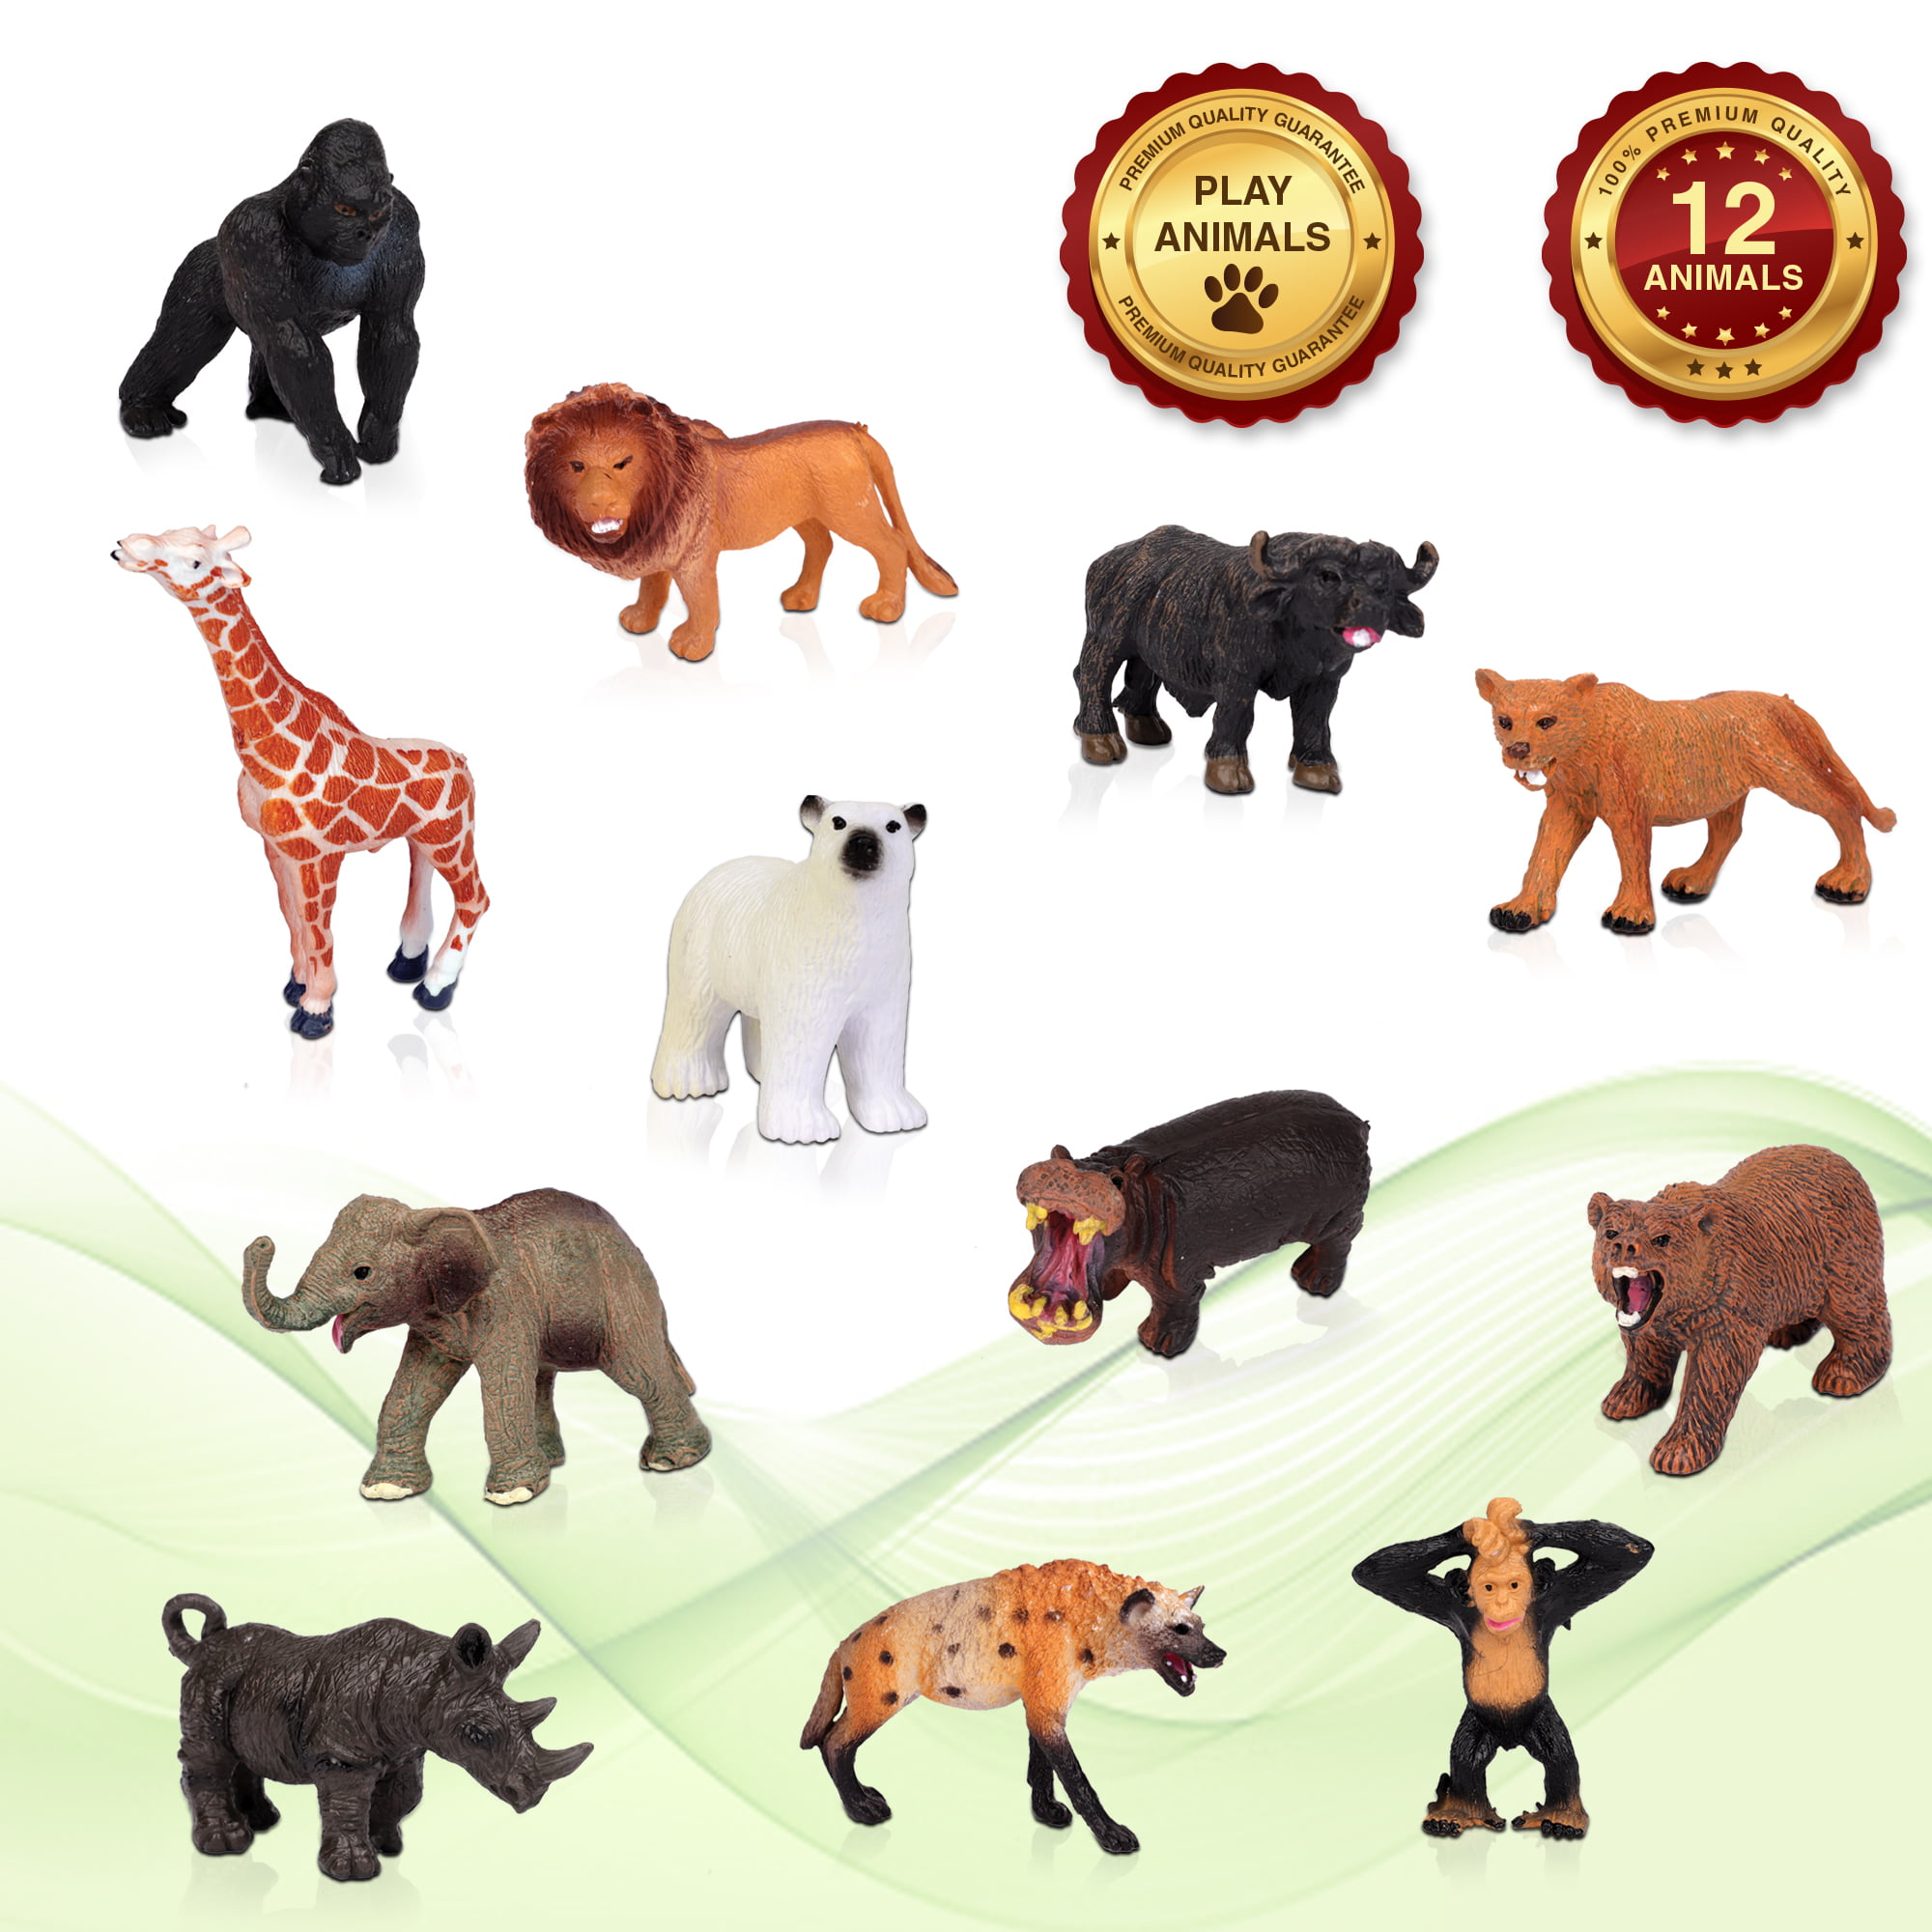 Lekebaby Animal Playset with 36 Realistic Animal Figures to Create an Animal World Great Educational Animal Toys for 3,4,5,6 Years Old Boys /& Girls